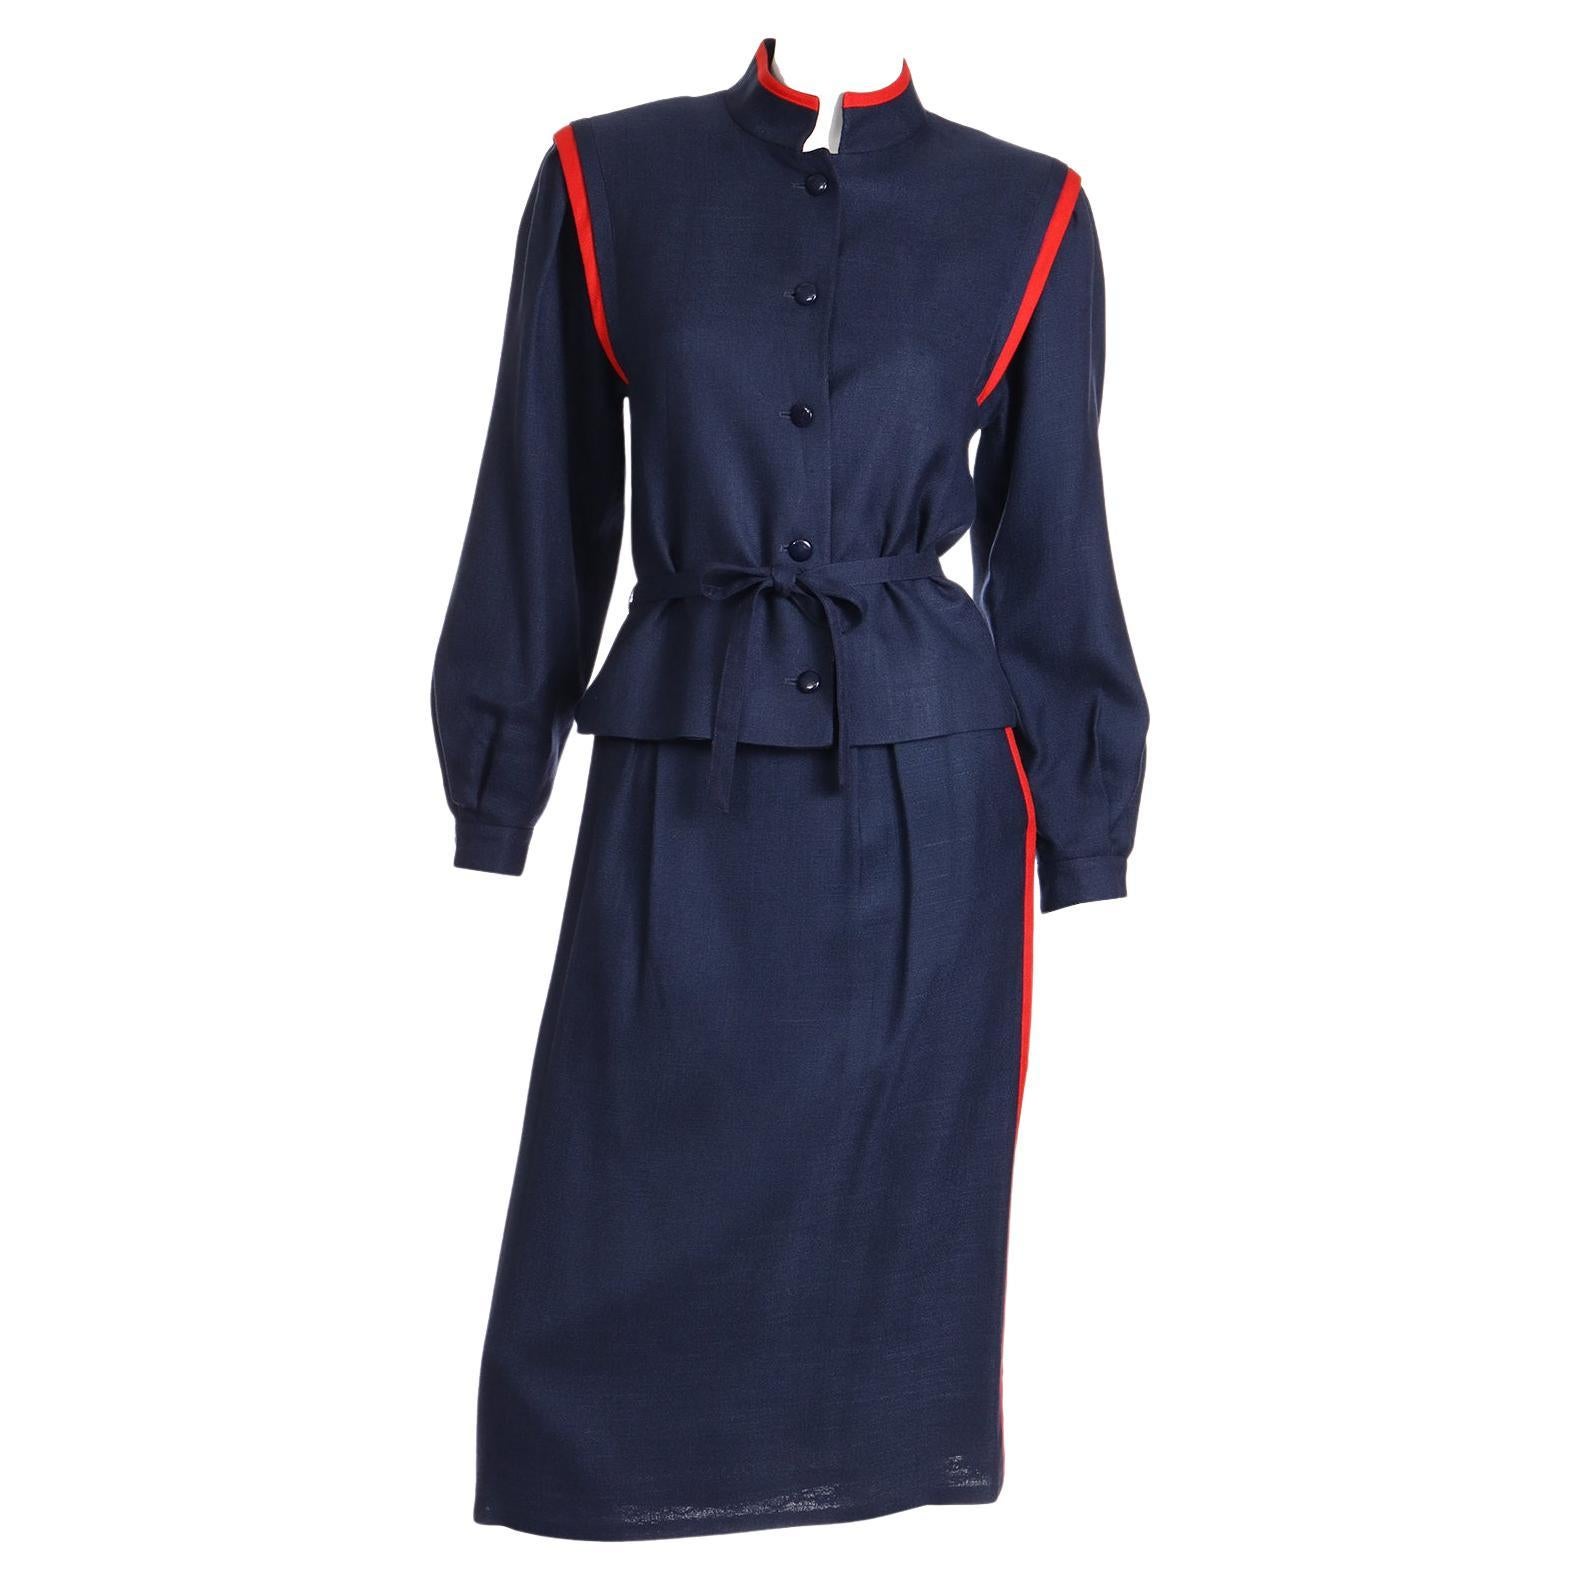 Louis Feraud Vintage Navy Blue and Red Linen Jacket and Skirt Suit